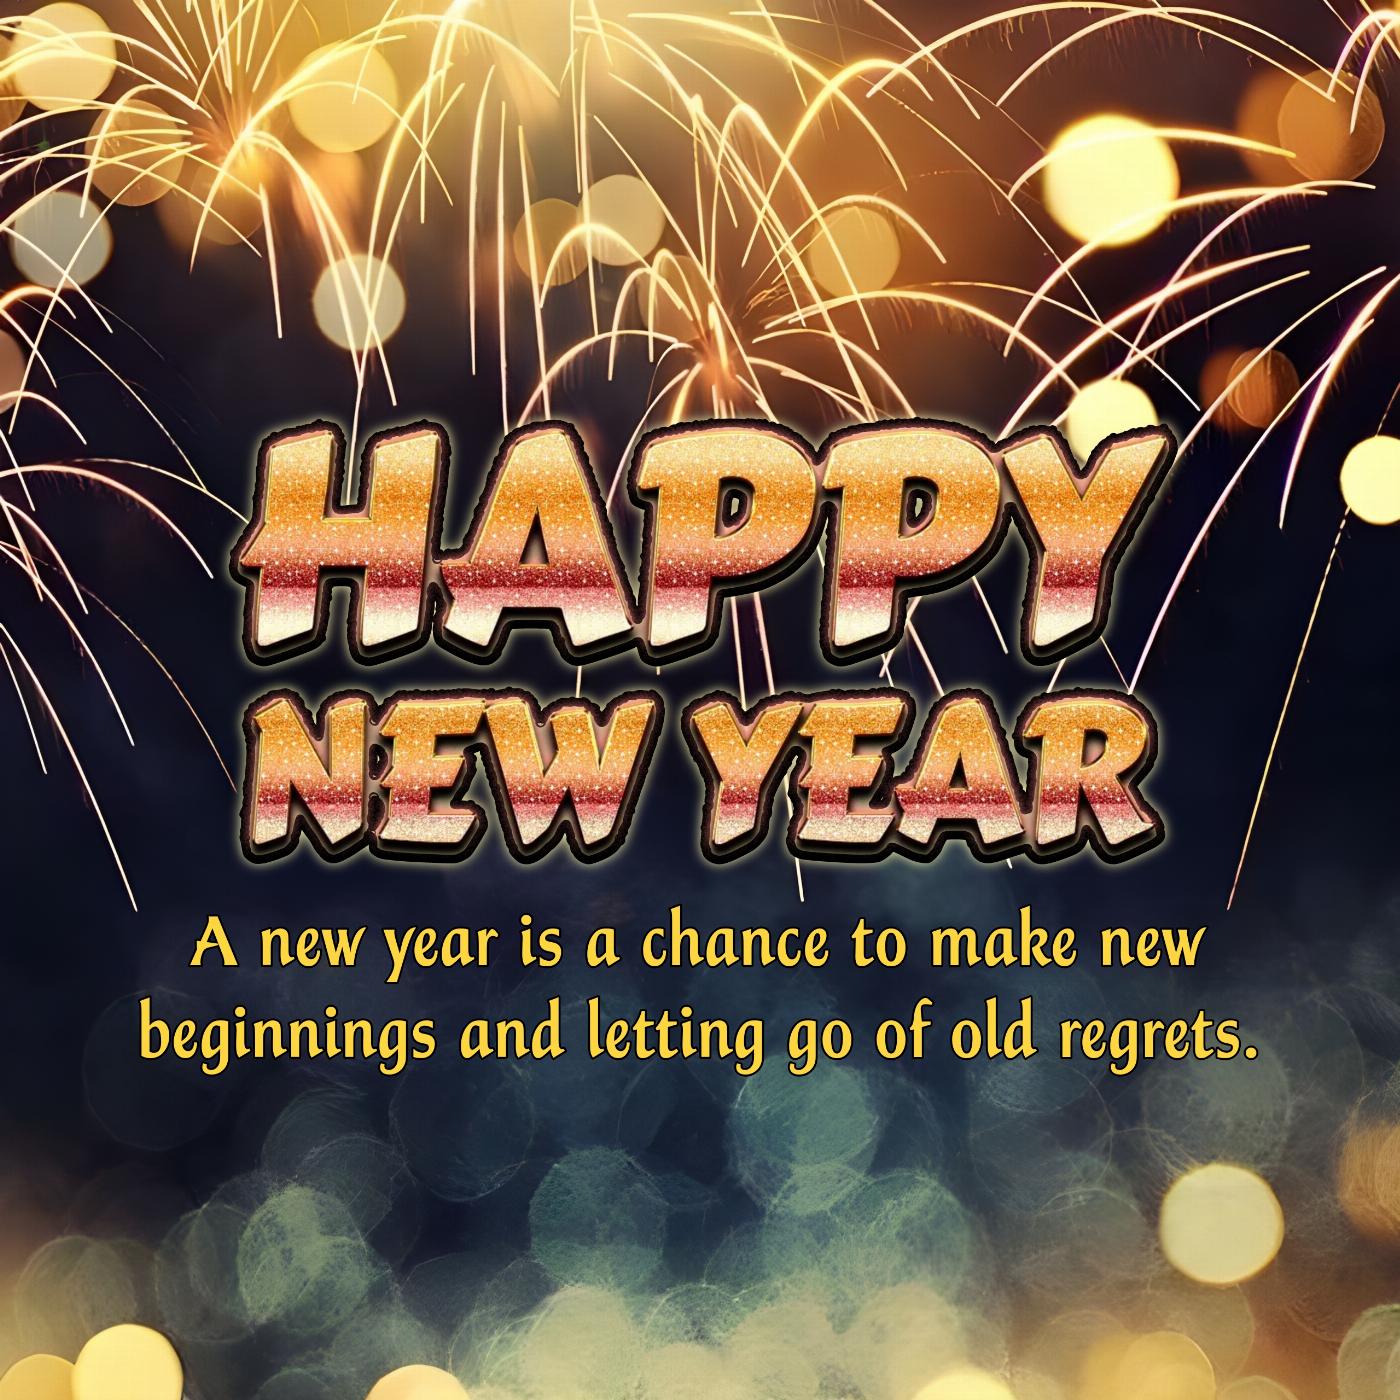 A new year is a chance to make new beginnings